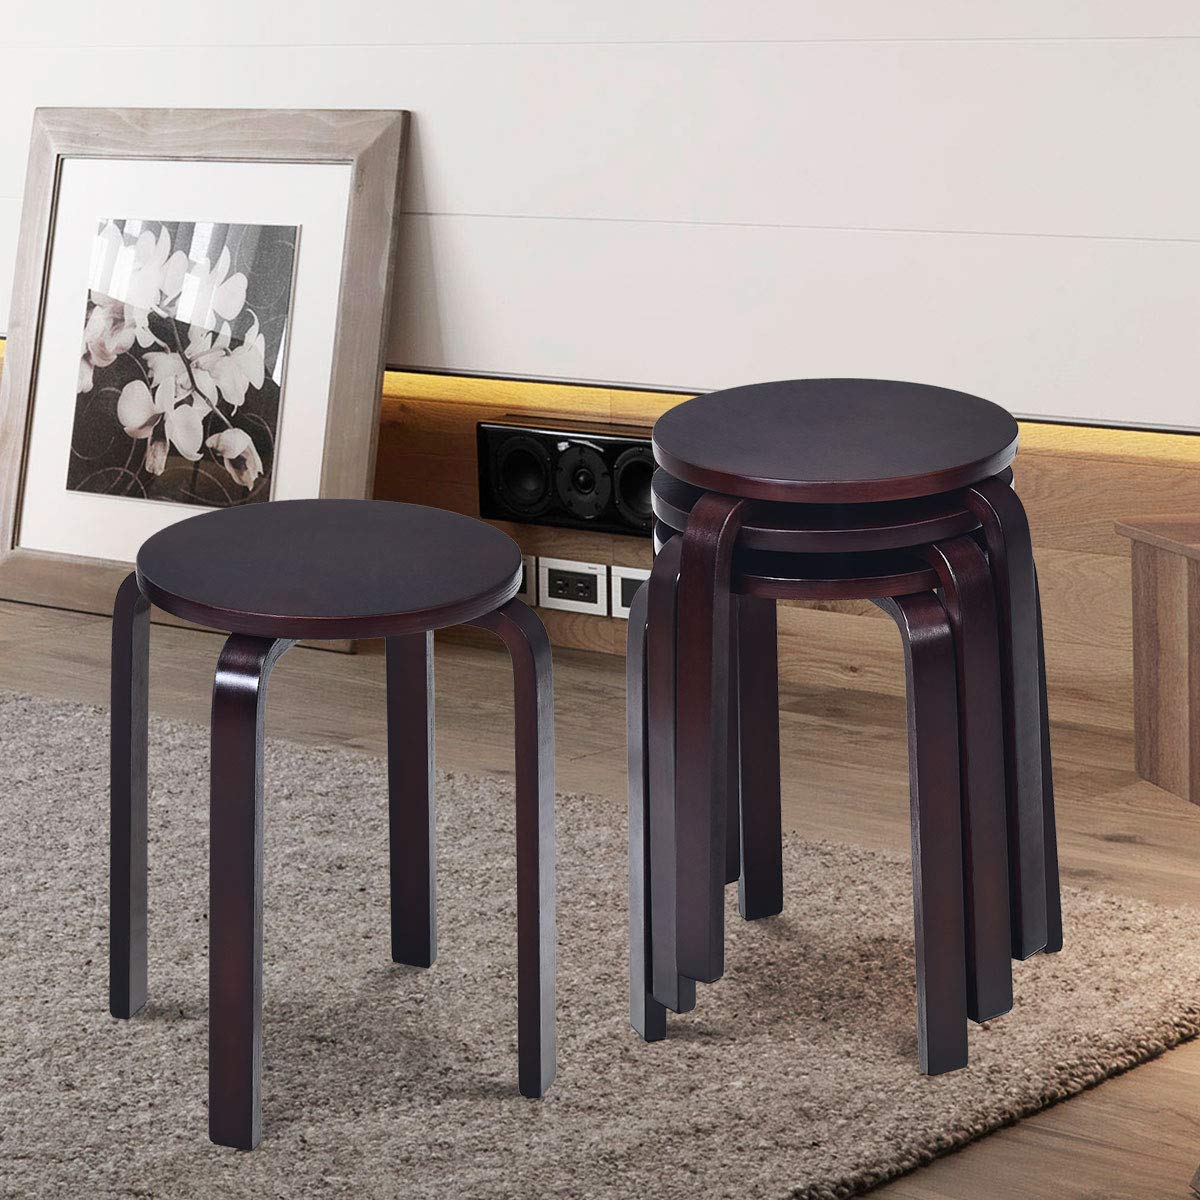 Stackable Bentwood Stools Set of 4, 18-Inch Height Backless Counter Chairs with Round Top, Anti-Slip Felt Pad